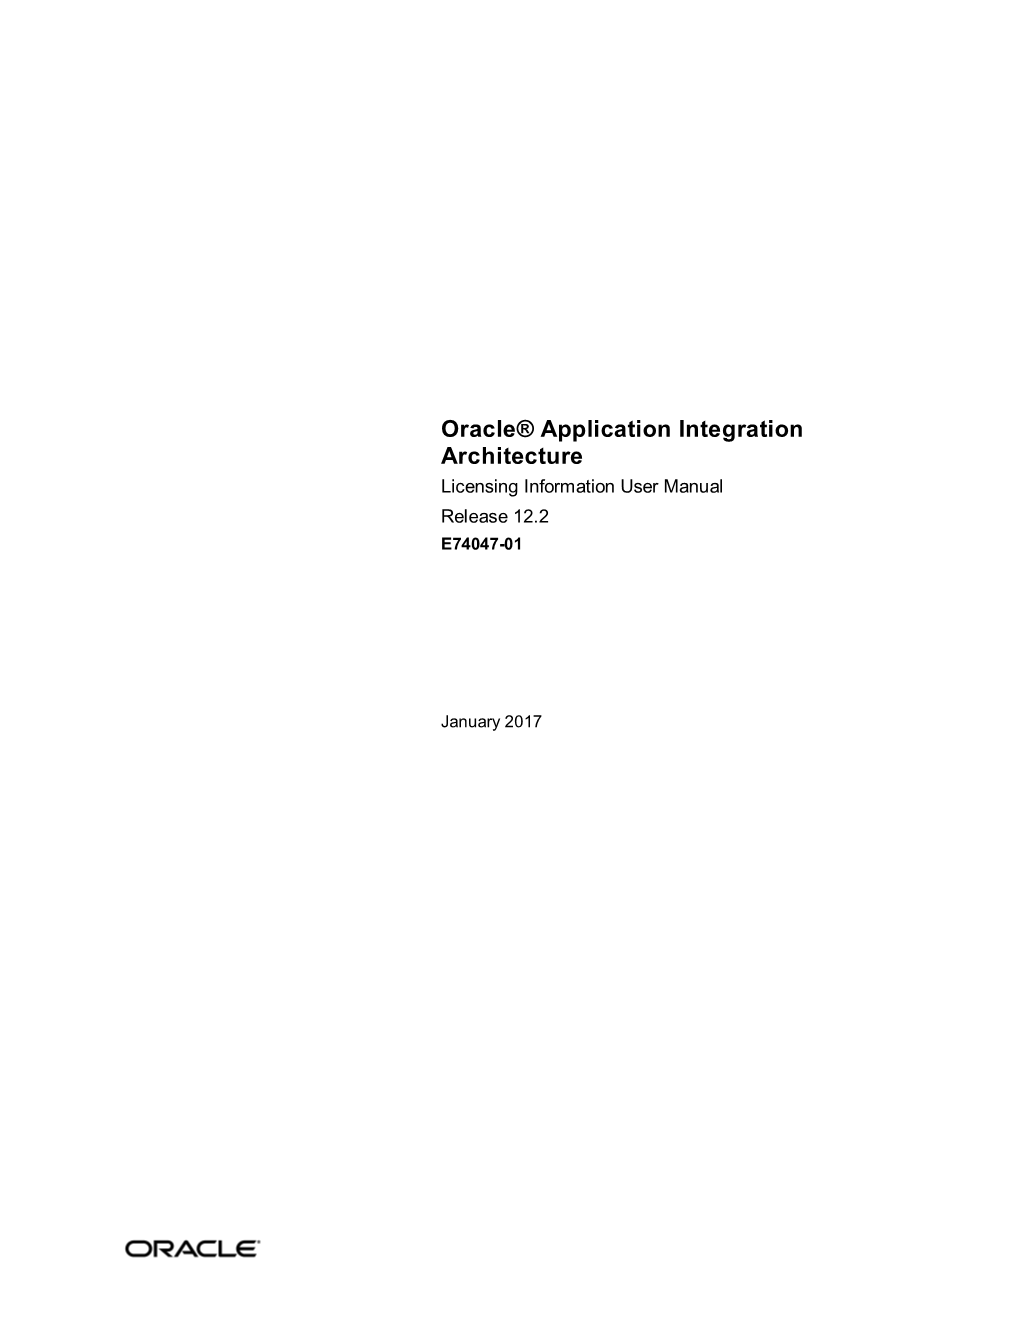 Oracle Application Integration Architecture Licensing Information User Manual Licensing Information